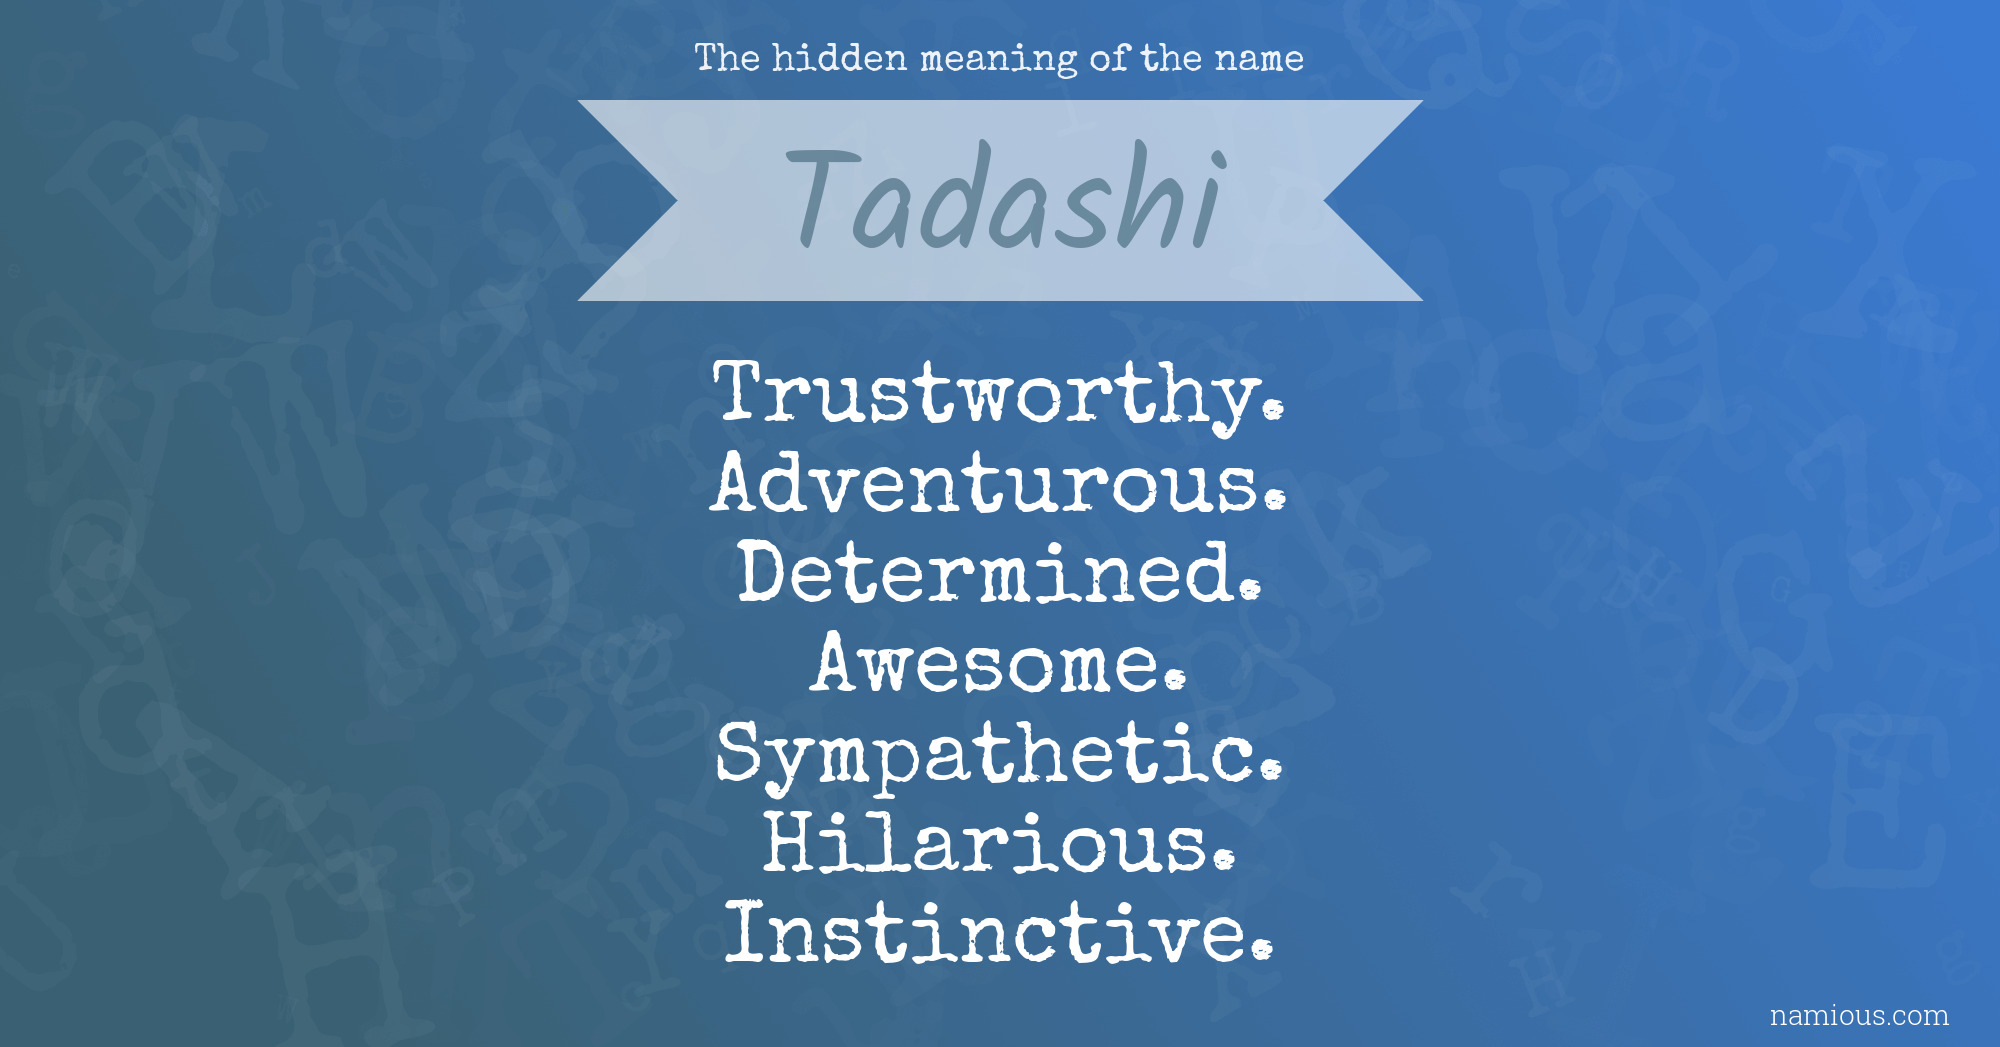 The hidden meaning of the name Tadashi